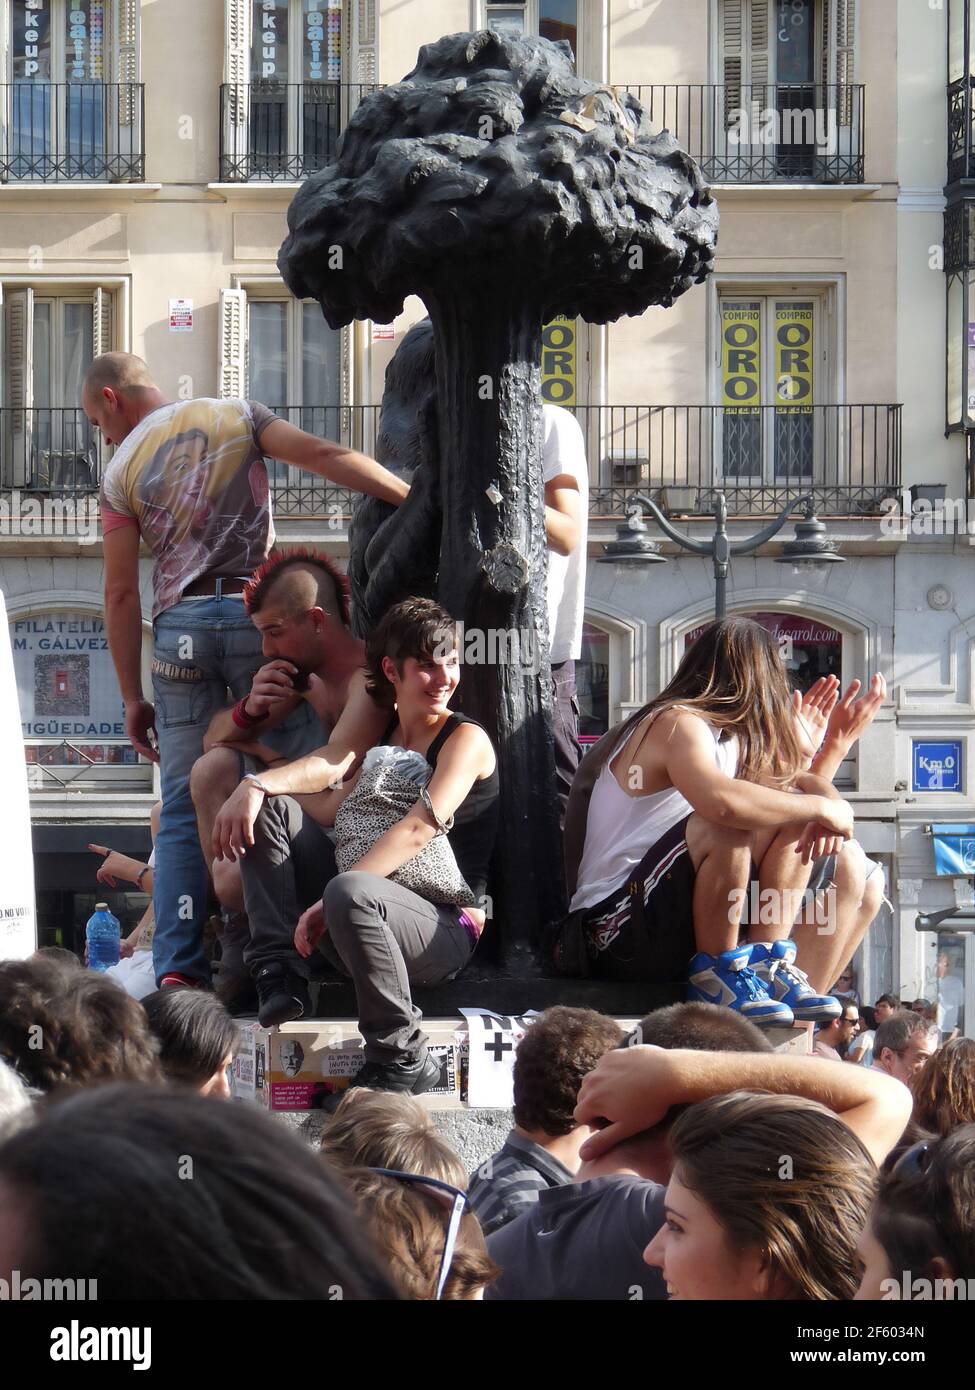 Madrid, Spain; June 11 2011. People on the statue of Oso y el Madroño watching. 15-M Indignados protests and encampment at Puerta del Sol in Madrid. P Stock Photo